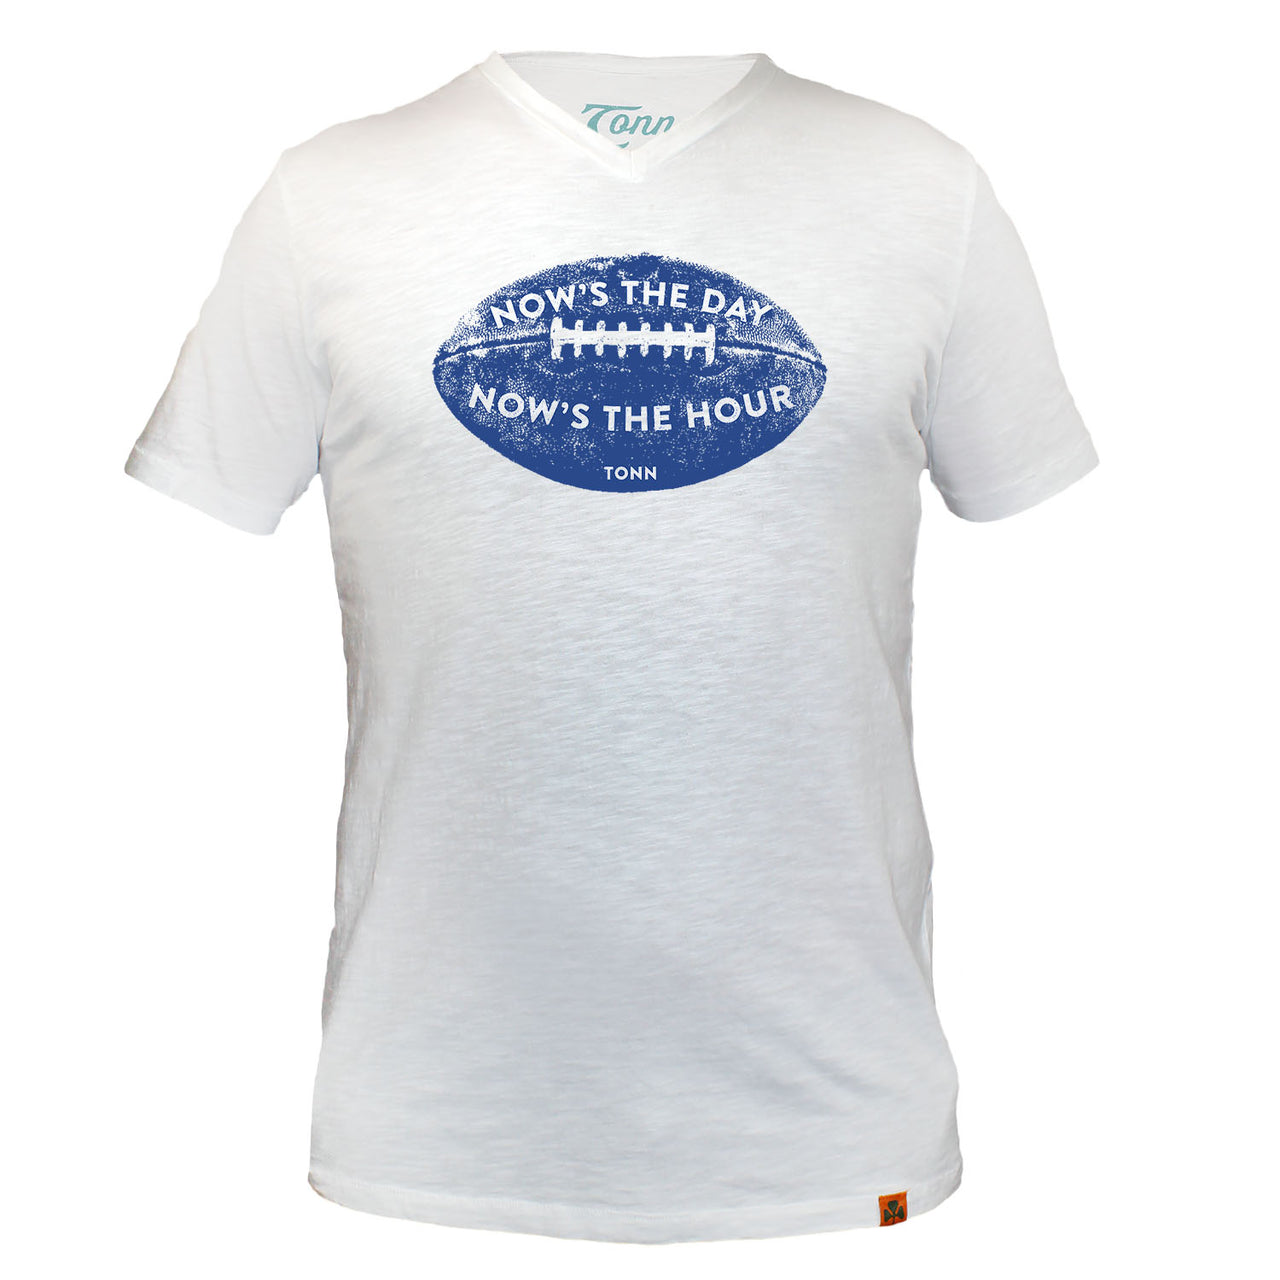 Nows the Day Rugby V Neck Tee.